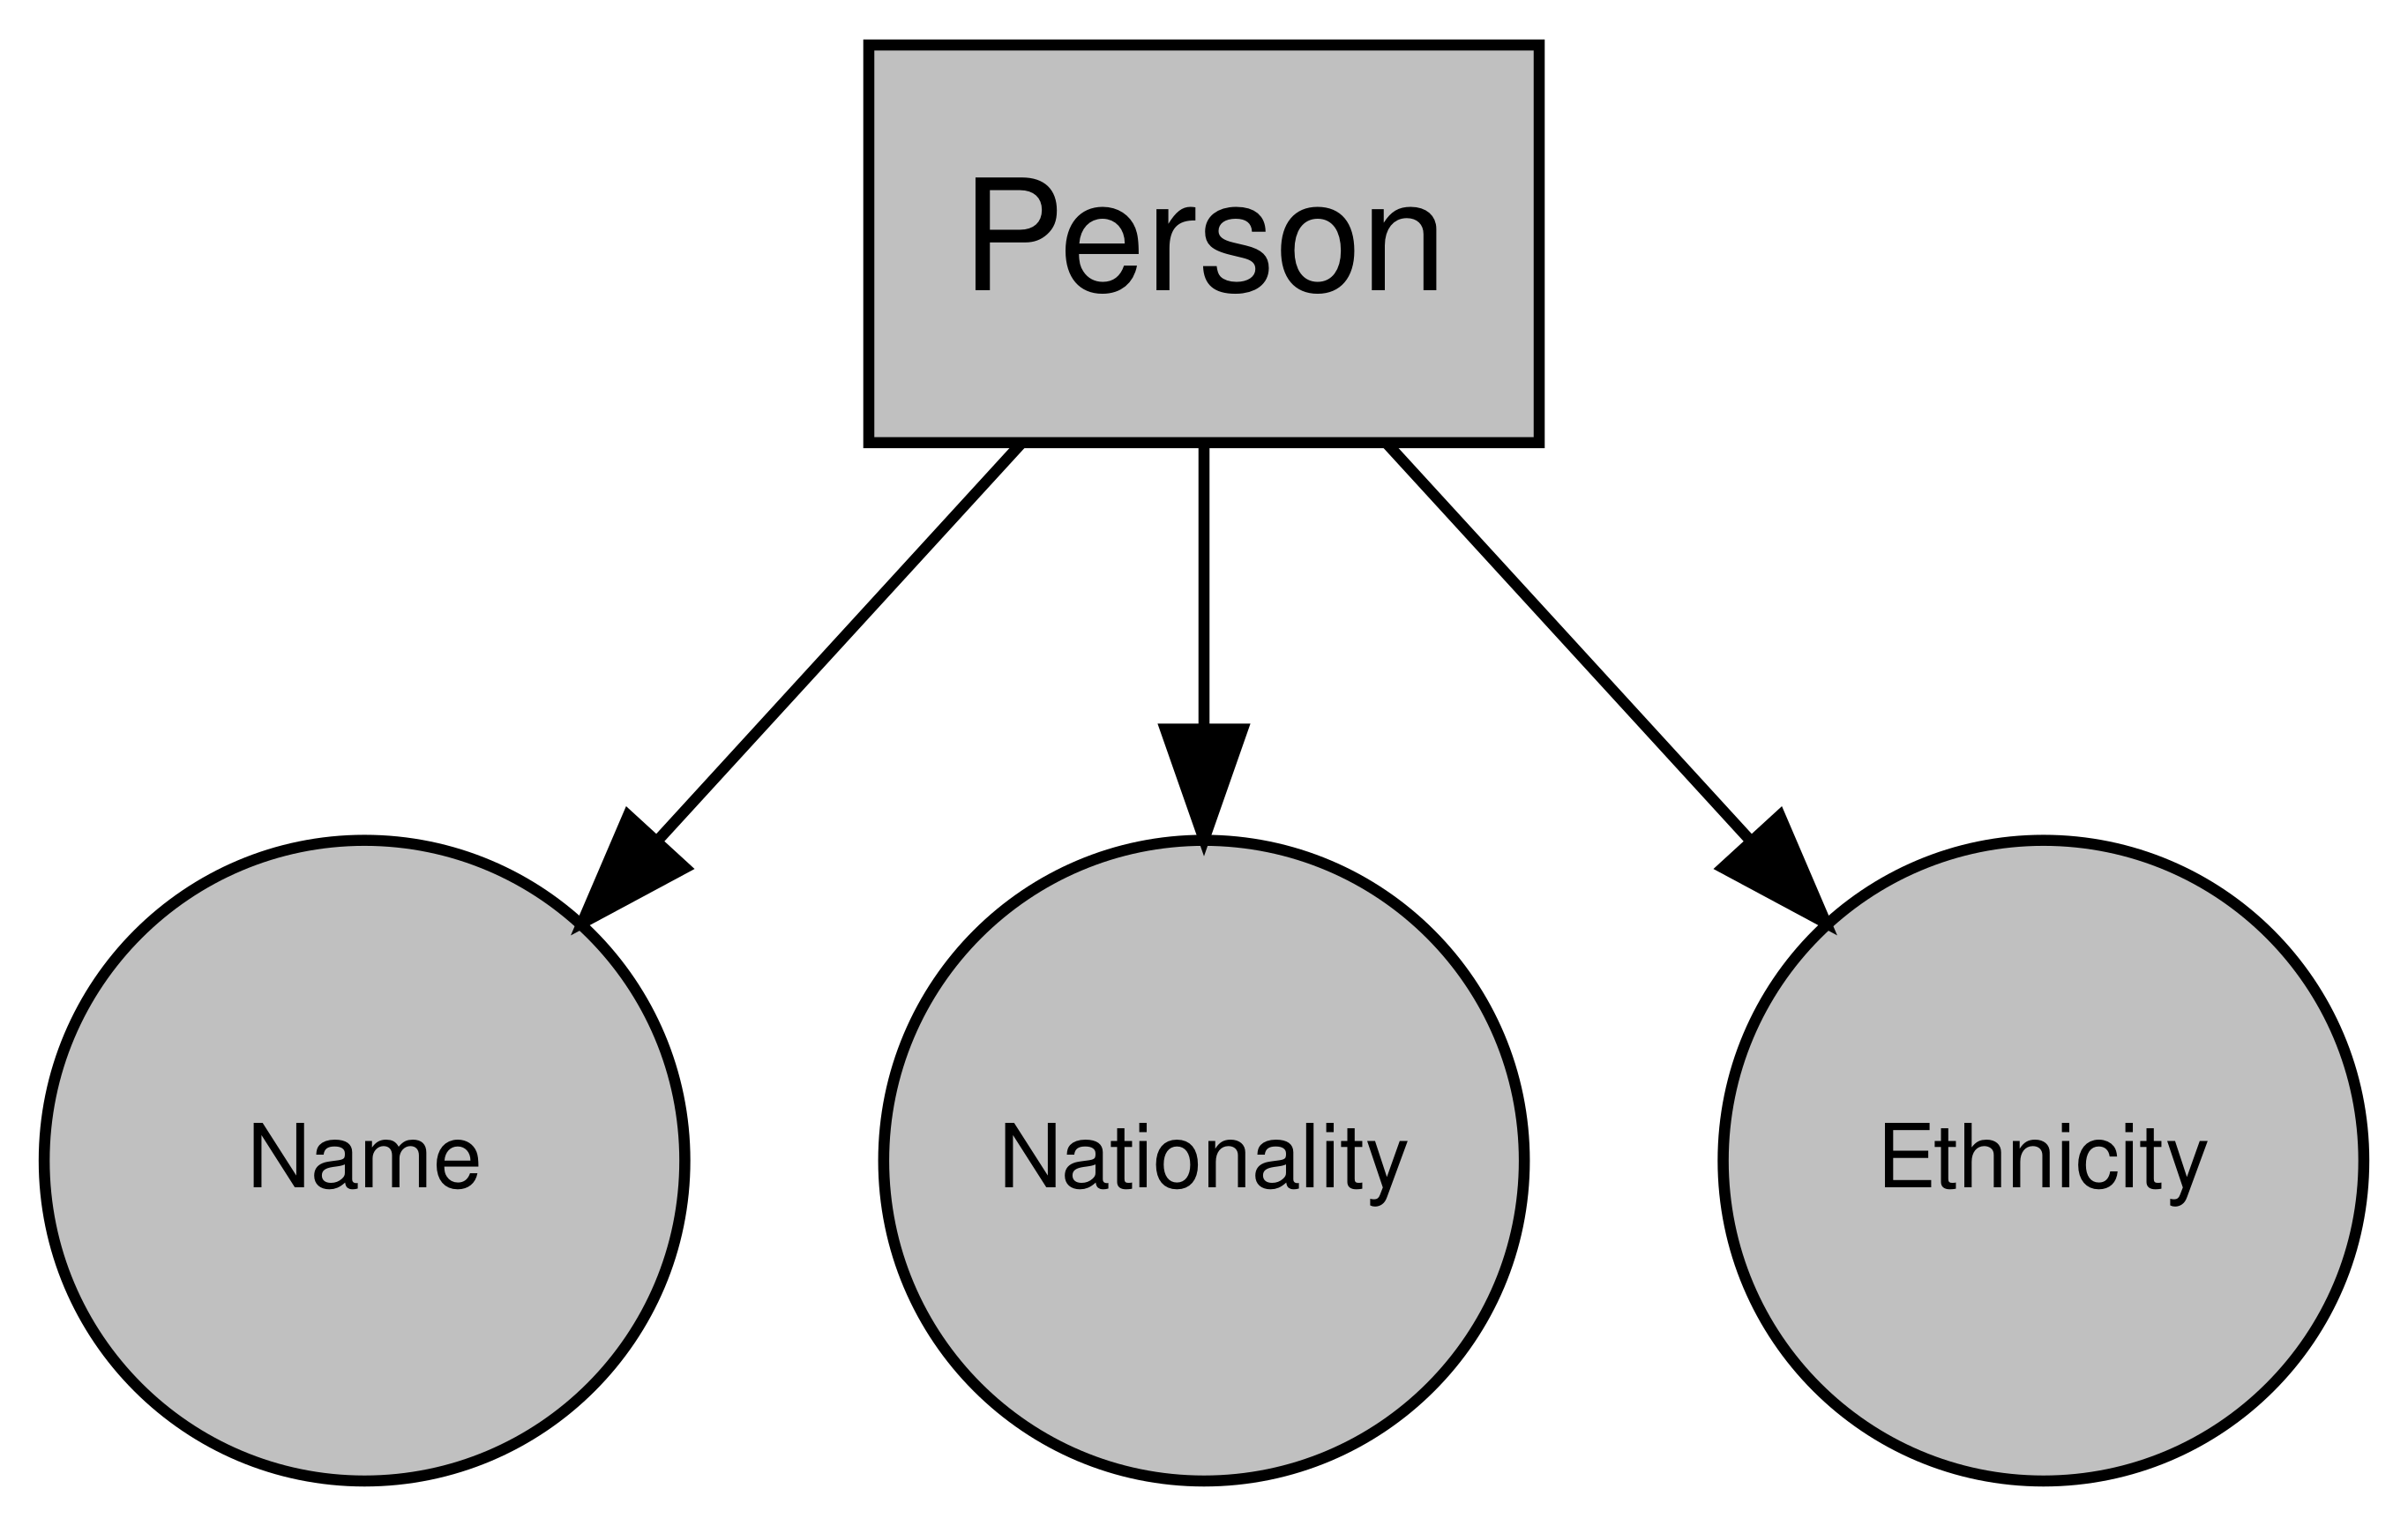 Example `Person` object